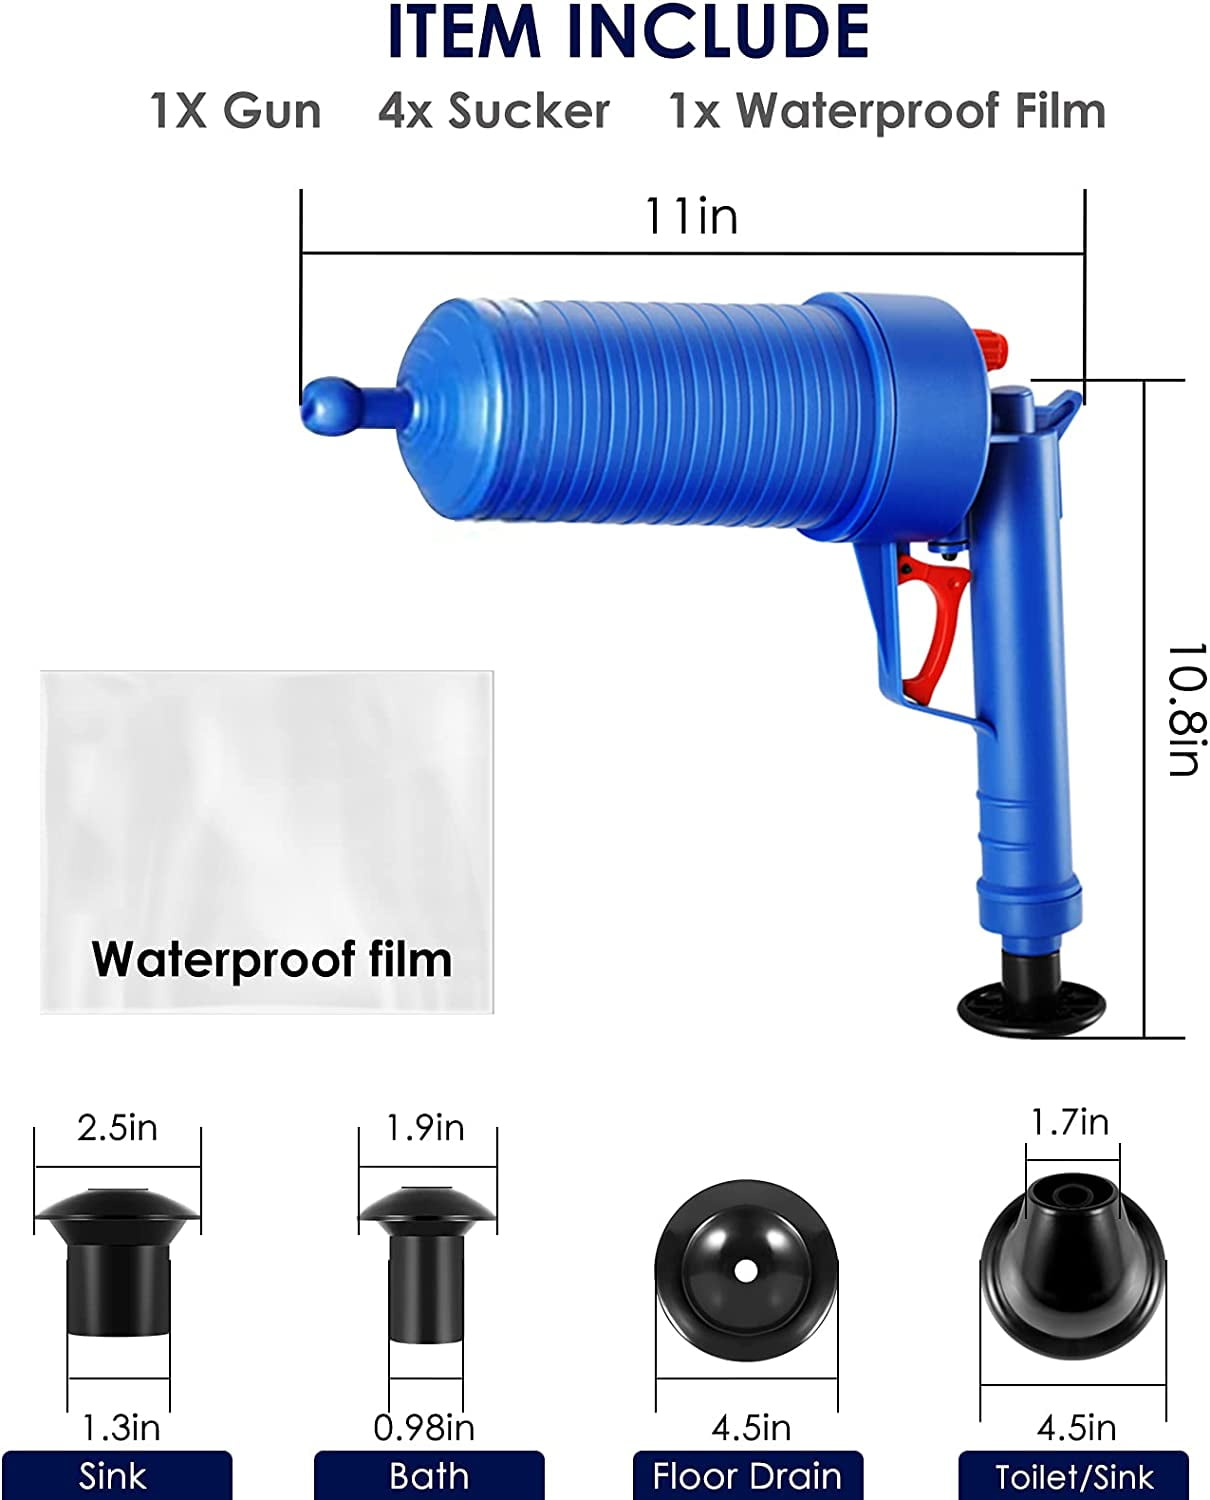 Fanmusic Toilet Plunger Set Air Power Toilet Unclogger Plumbing Tools Cleaning Tool Clog Remover for Home Bathroom Kitchen Squat, Size: 57cmx12.5cm, White